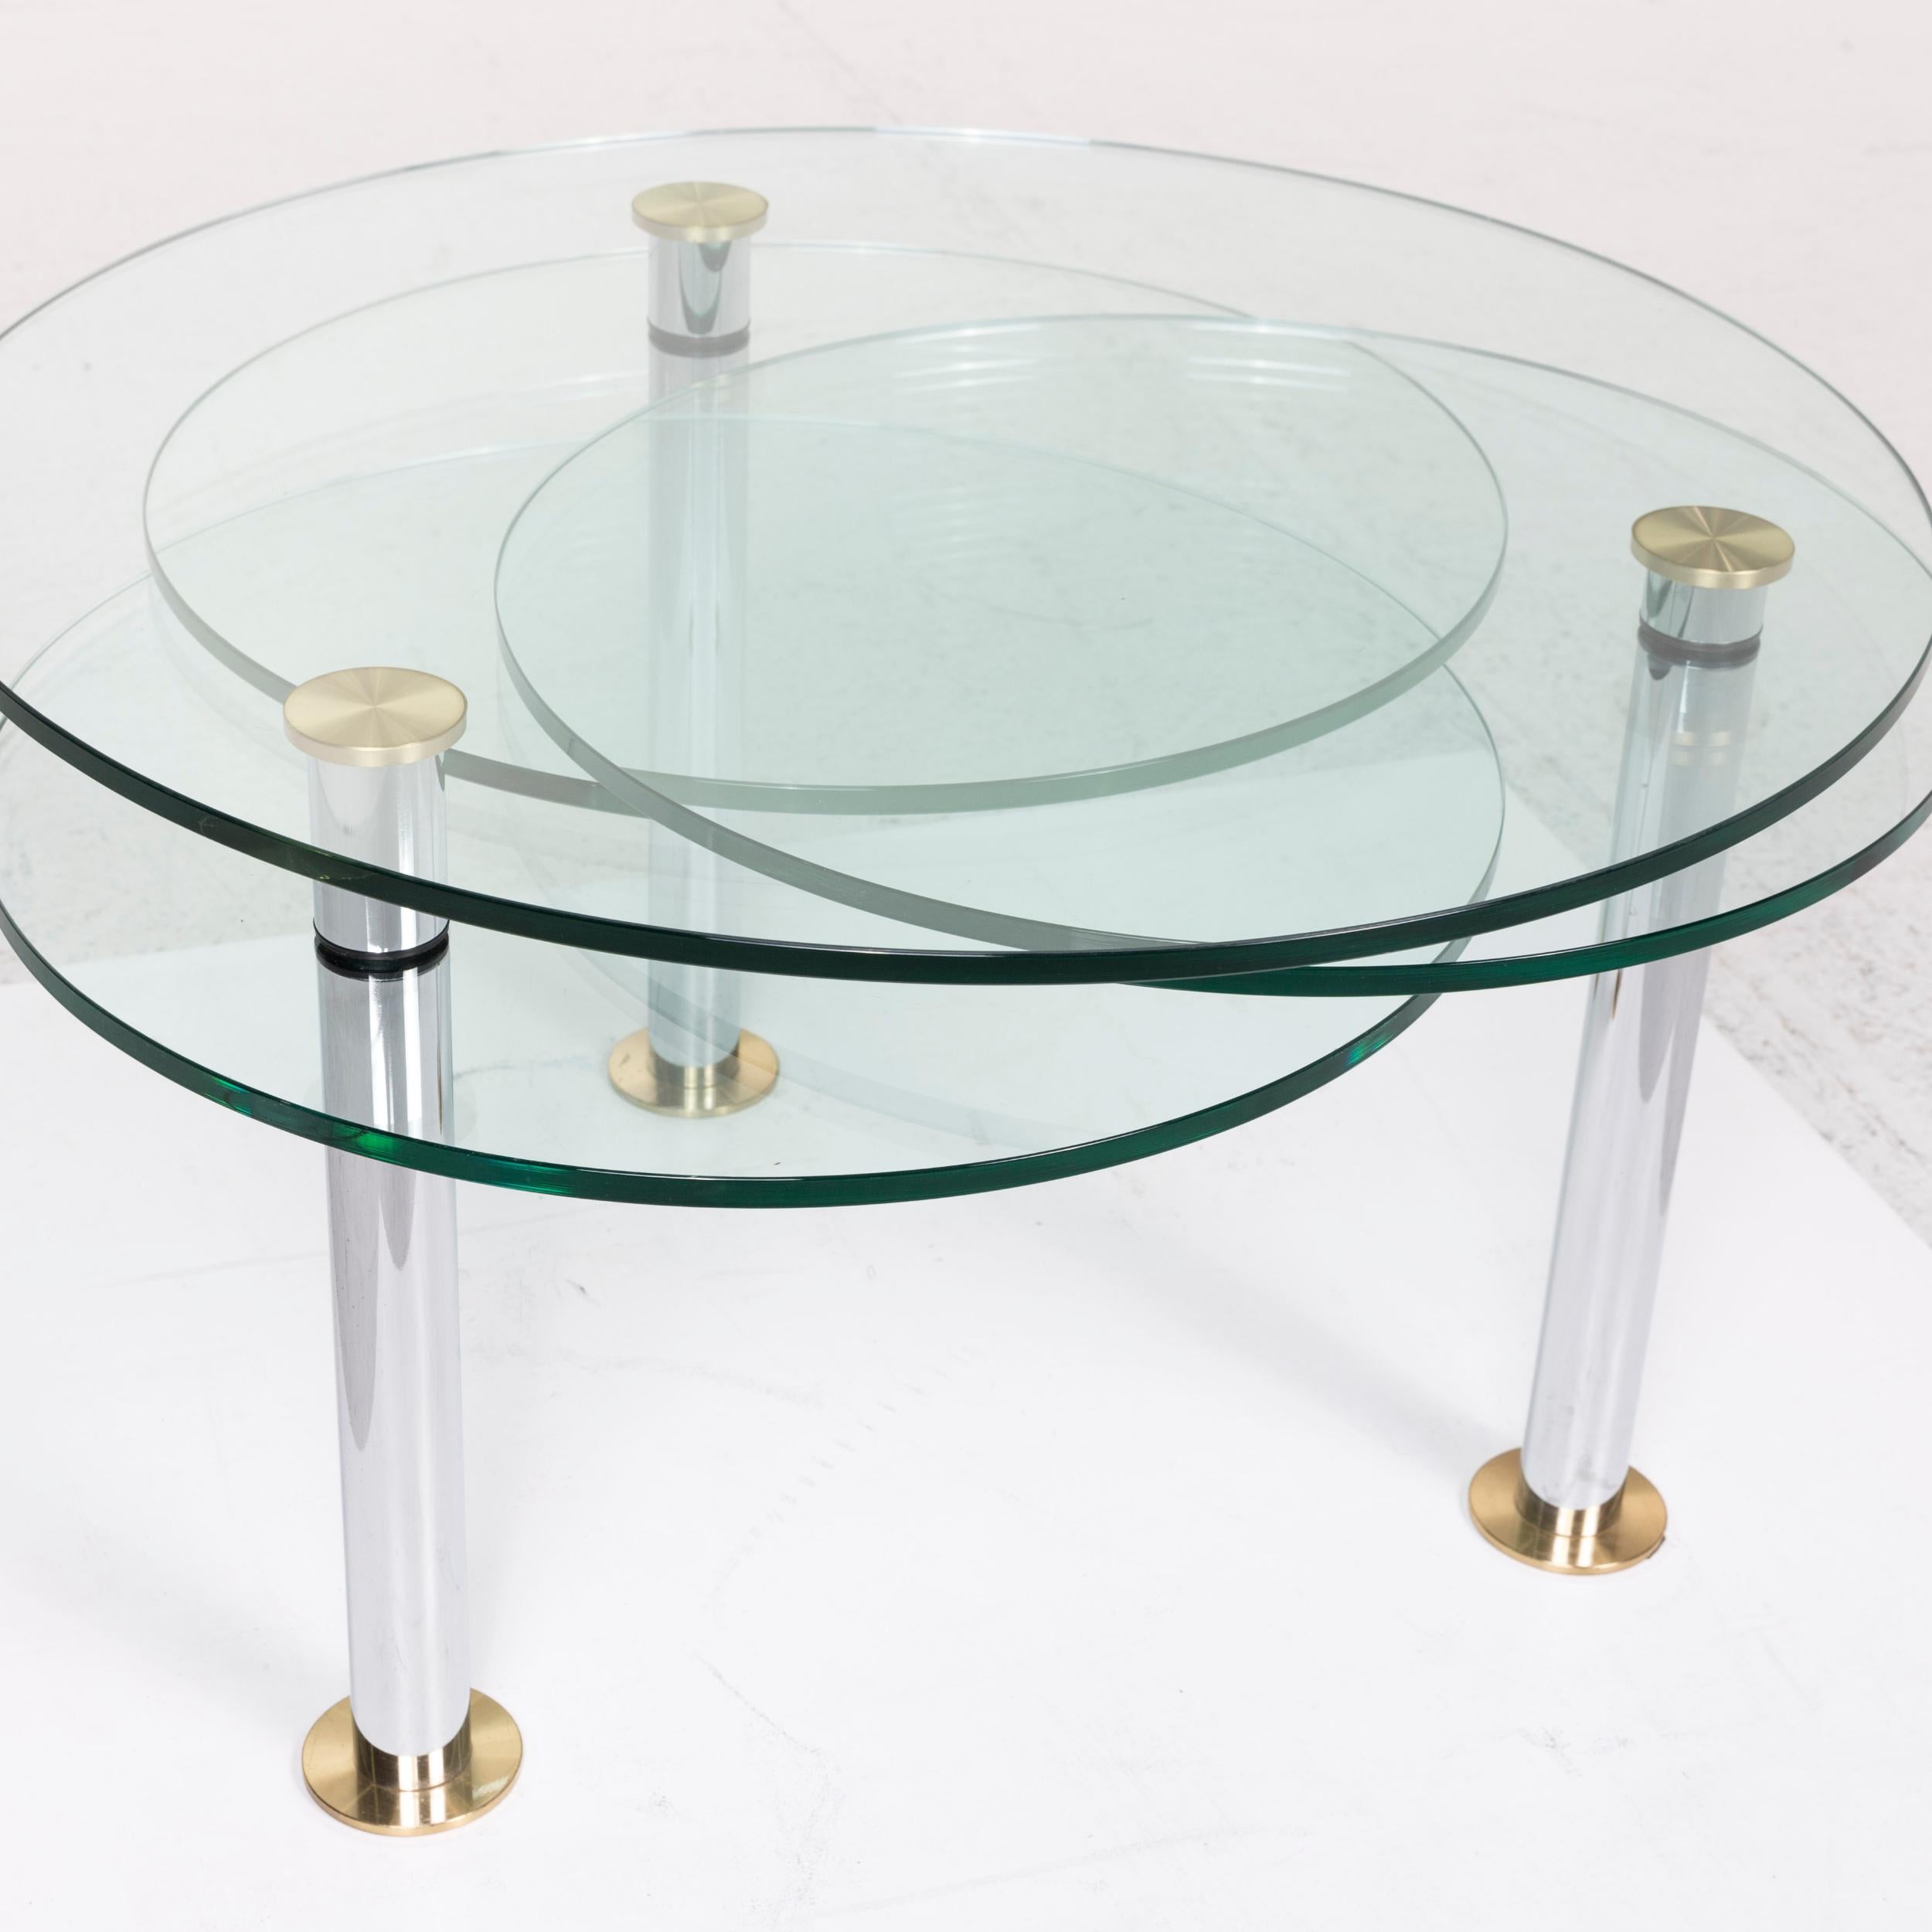 Modern Draenert Glass Coffee Table Round Table Function Flexible For Sale